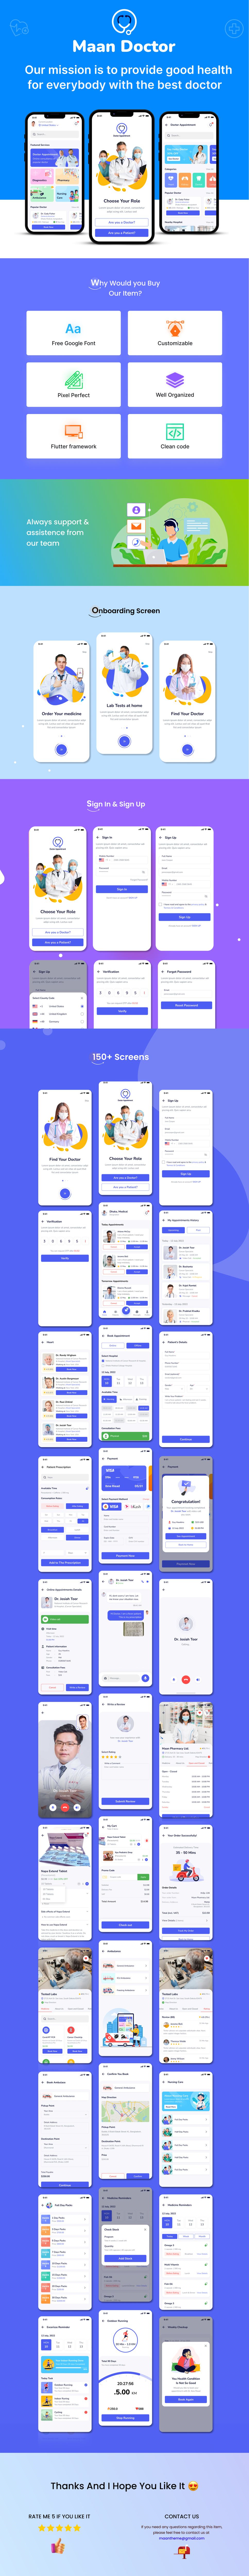 Maan Doctor- Online Doctor Appointment Booking Flutter App UI Kit - 2